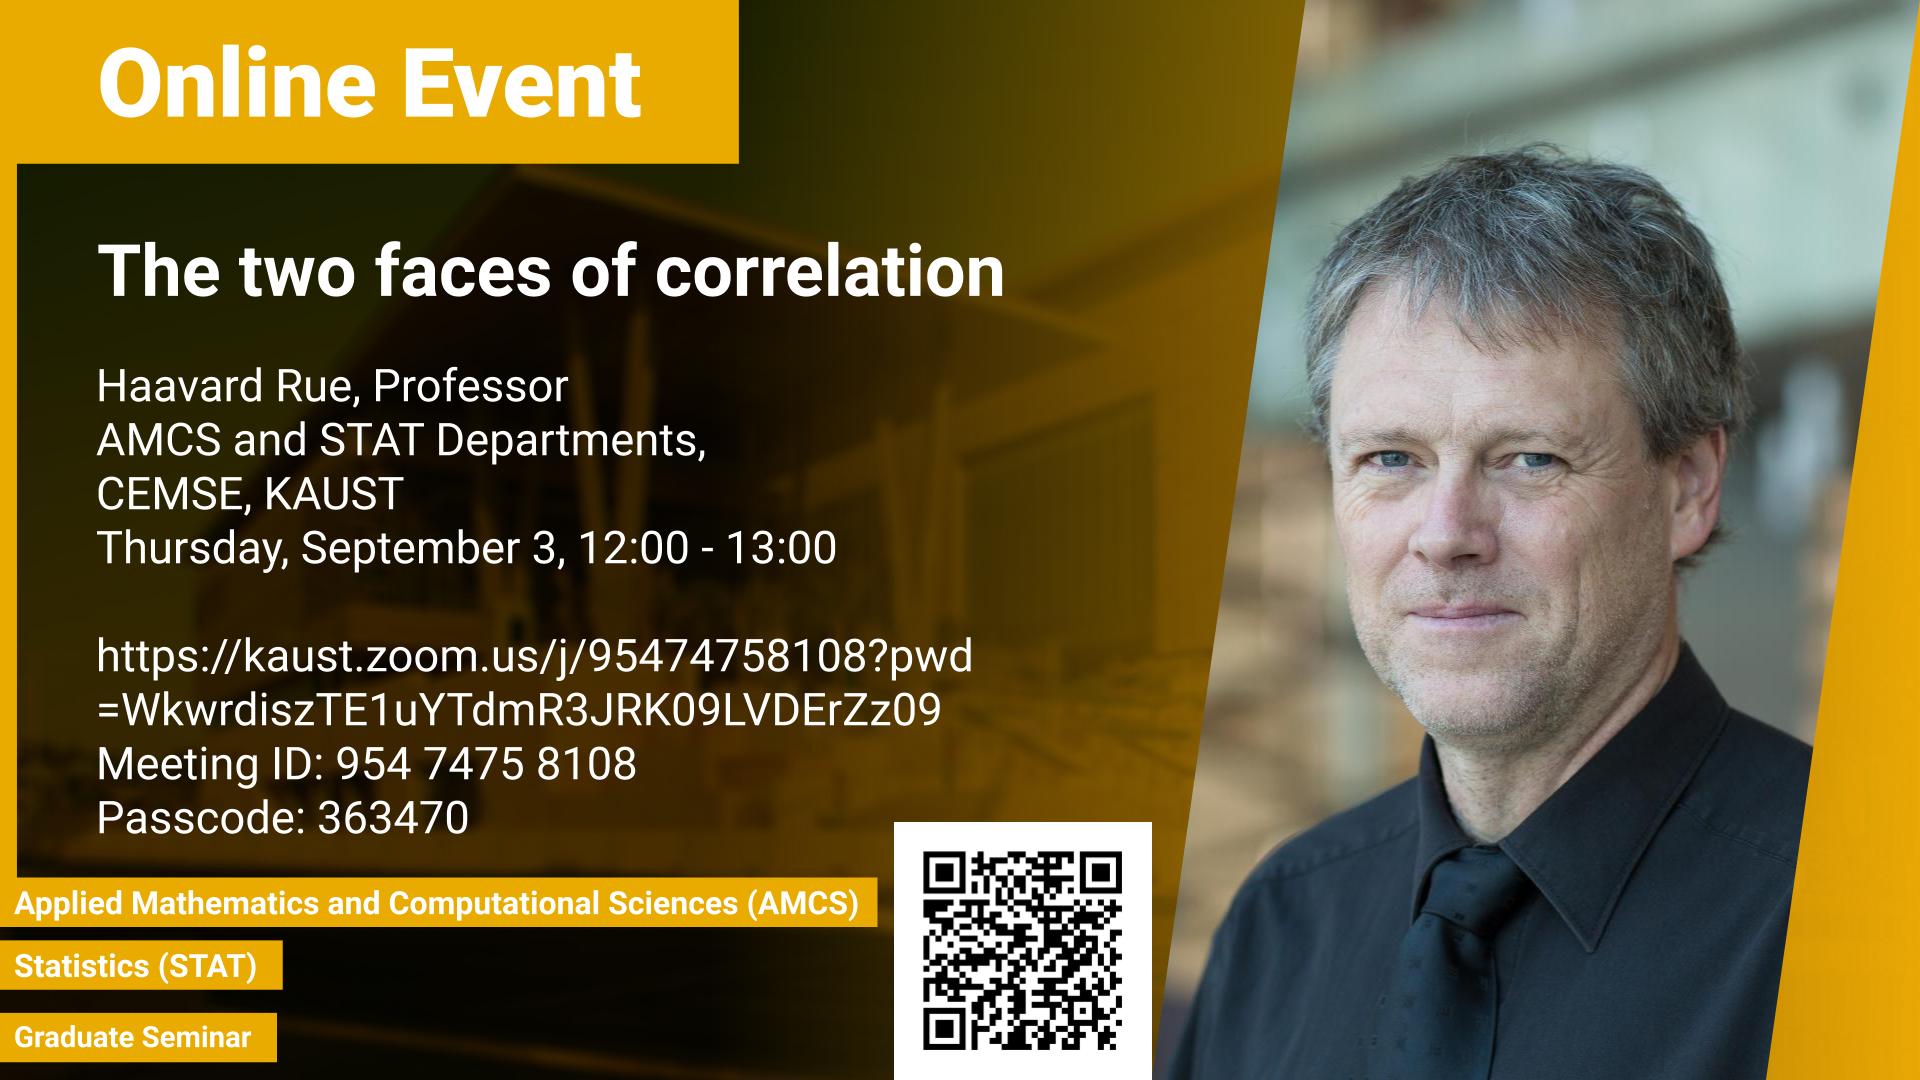 KAUST CEMSE STAT AMCS Graduate Seminar Haavard Rue The Two Faces Of Correlation